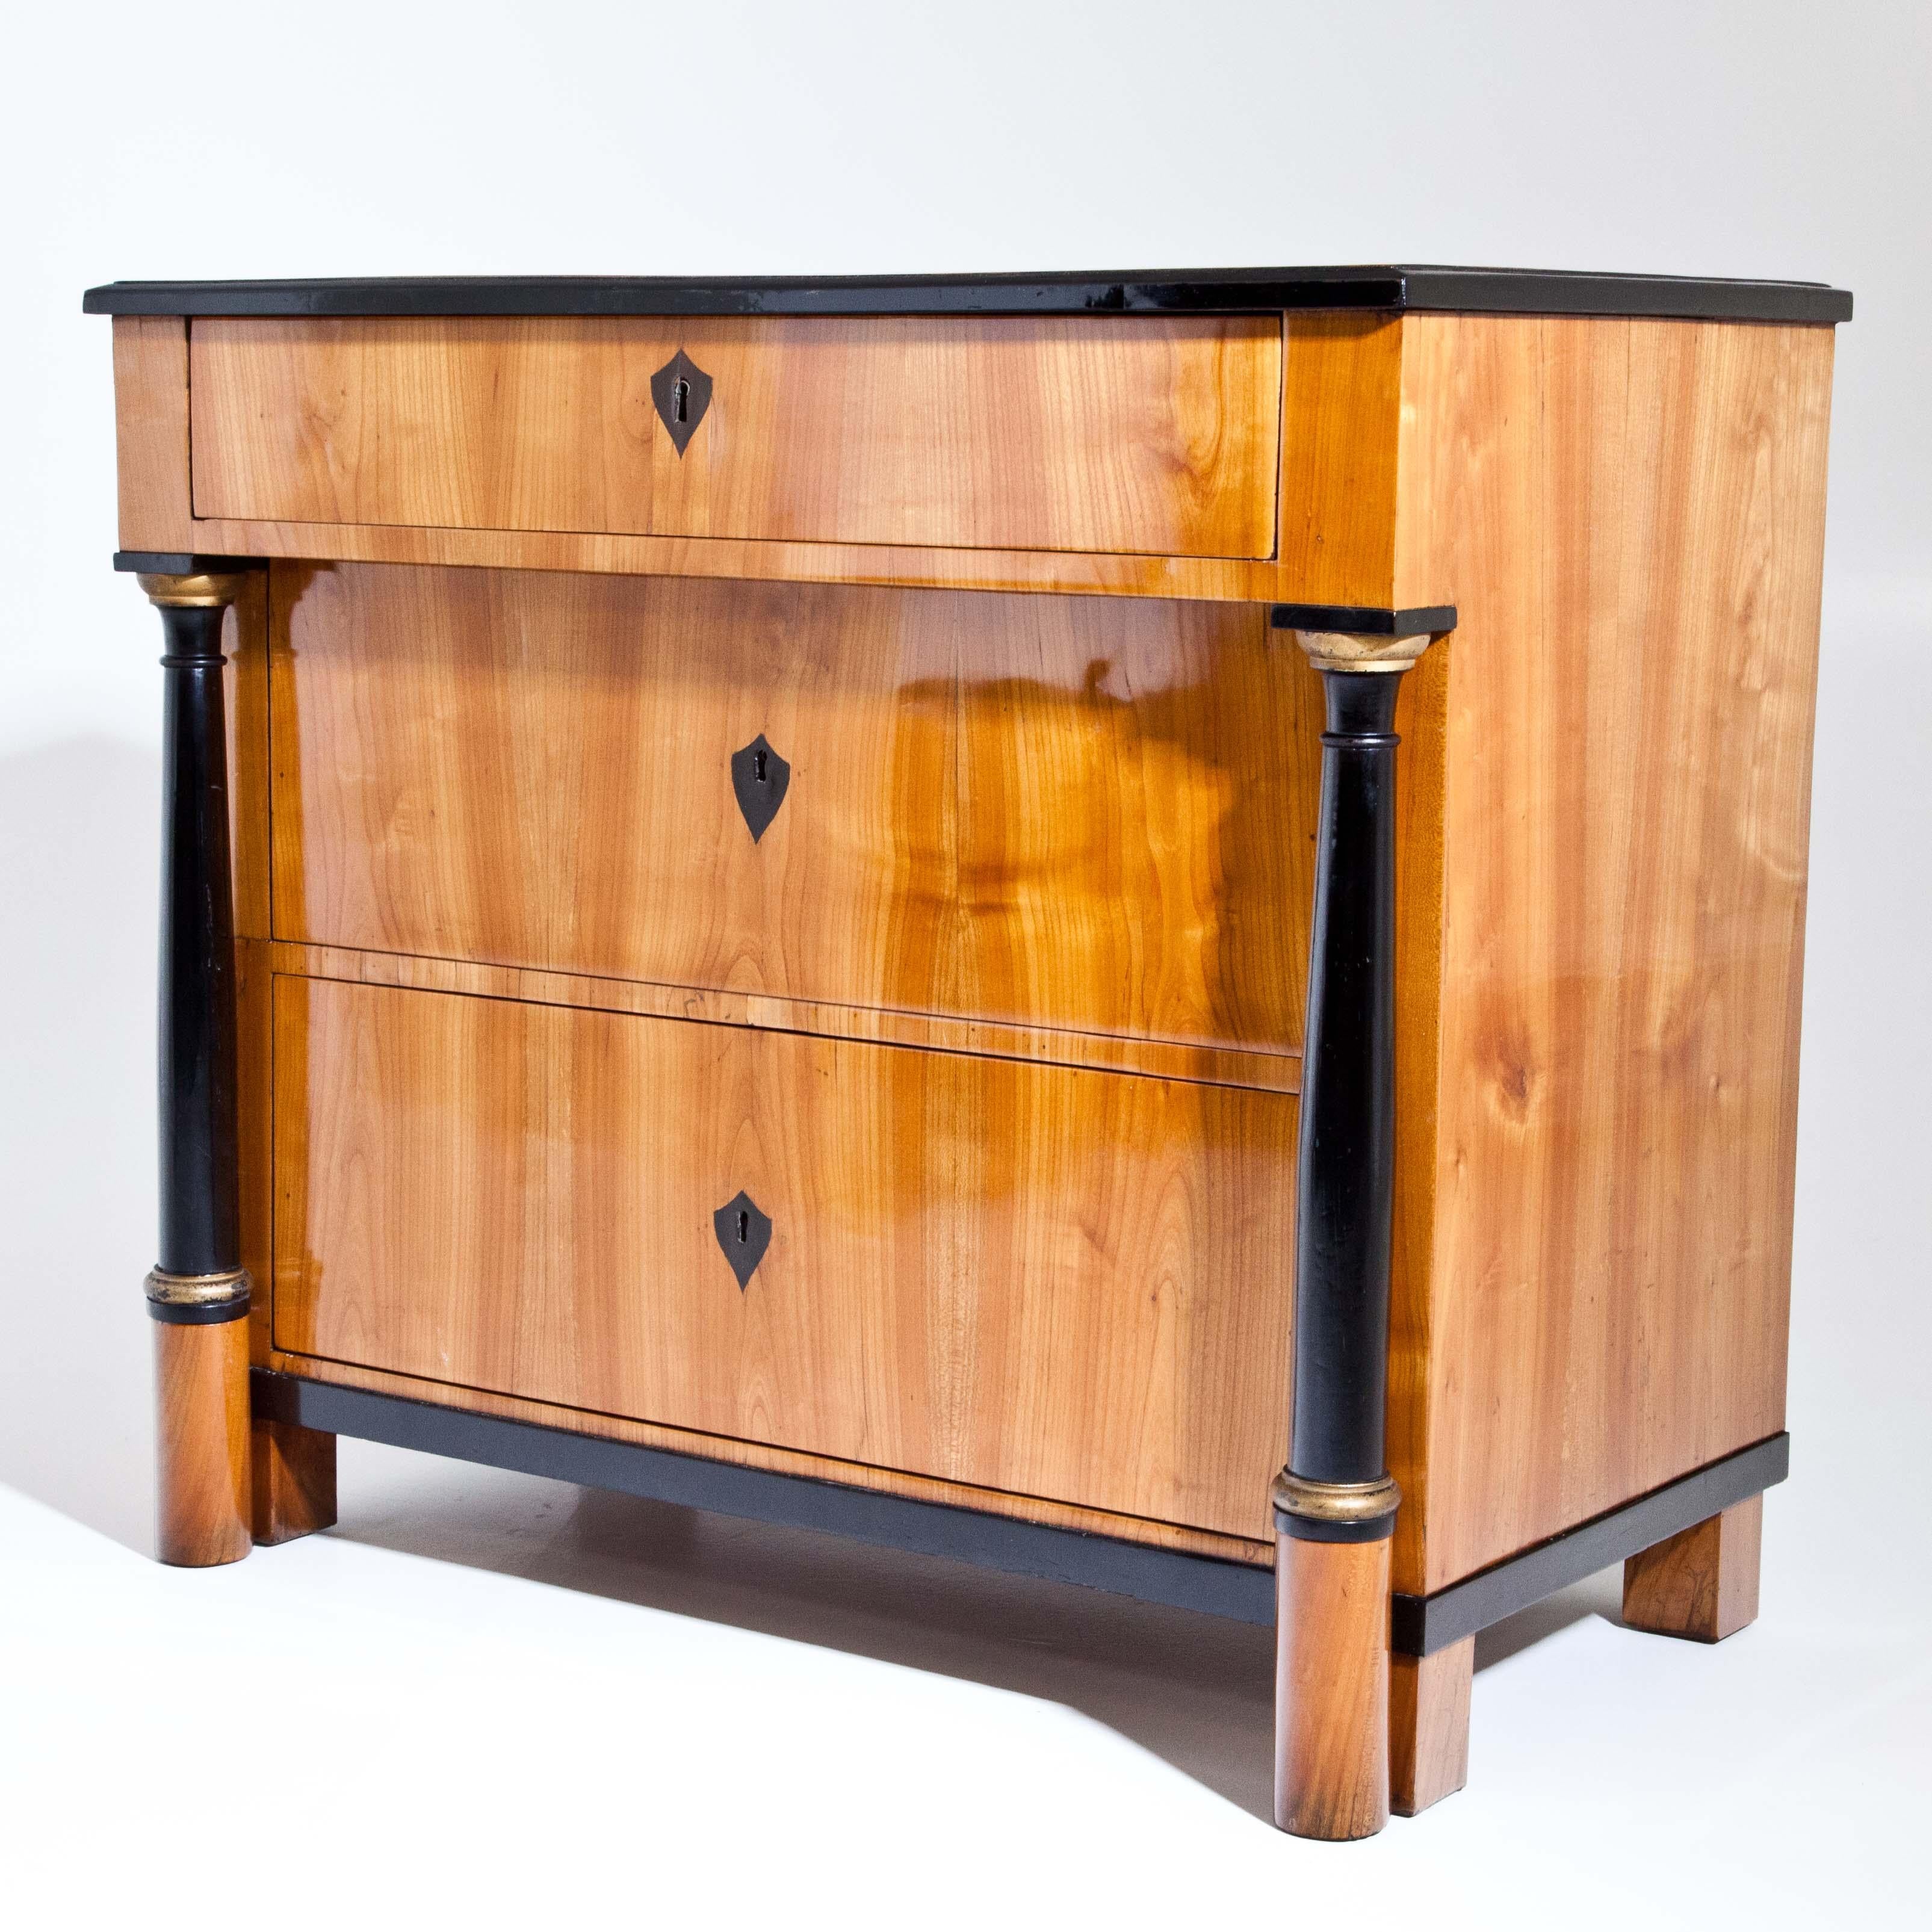 Biedermeier chest of drawers in cherry veneered with ebonised and partly gilt columns, supporting the protruding top drawer. The escutcheons and edges are ebonized. The chest of drawers has been expertly prepared and hand polished.